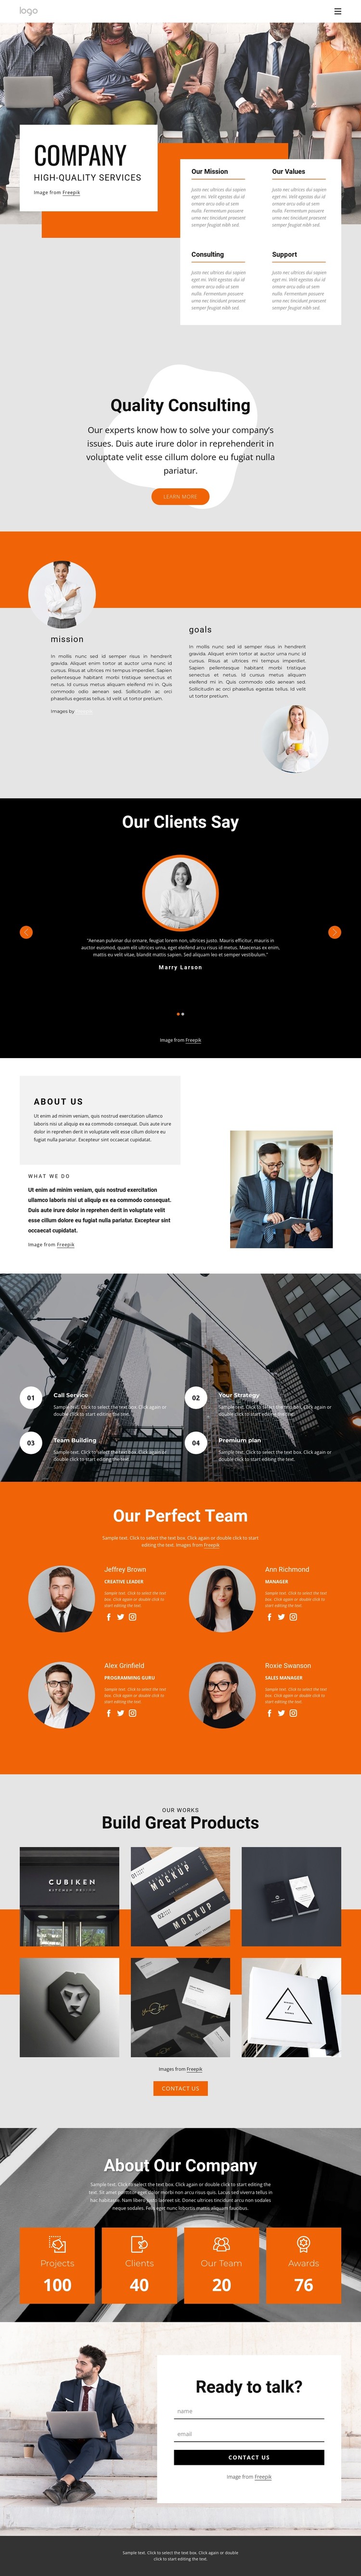 Hight quality consulting firm CSS Template